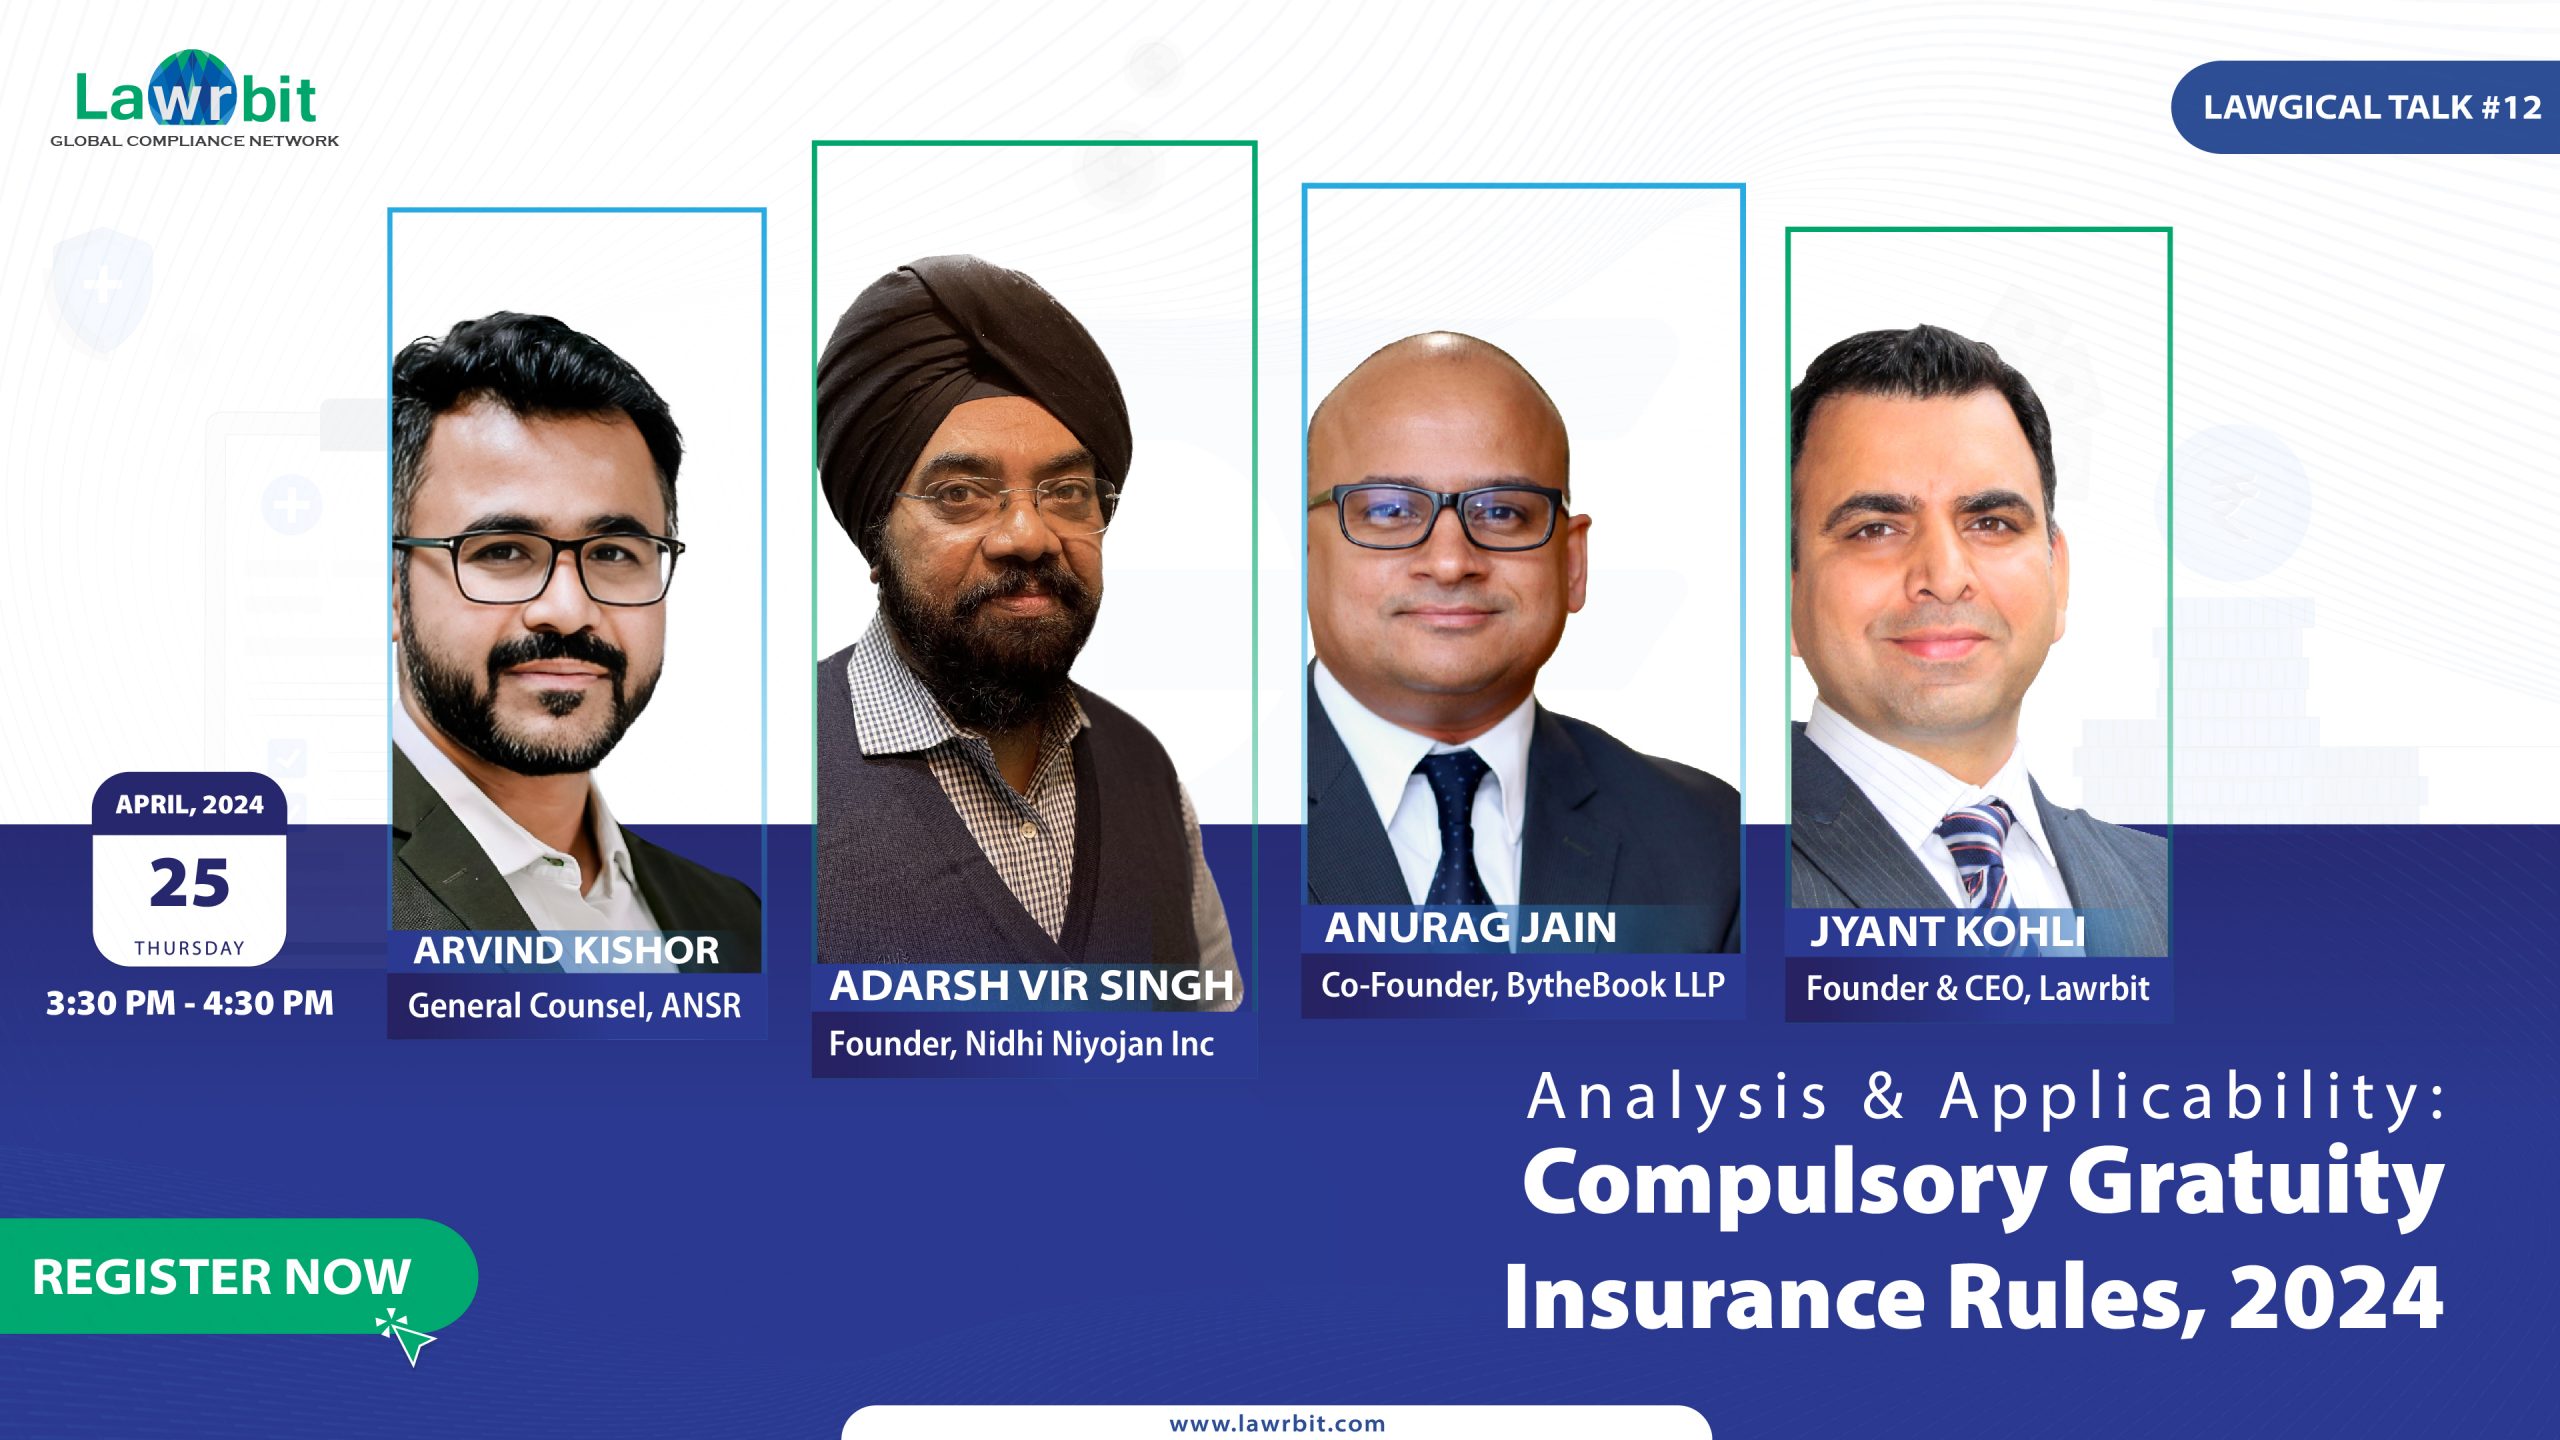 Webinar #12 : Live Panel Discussion on Compulsory Insurance Gratuity Rules, 2024 scheduled on April 25th, 2024 @ 3:30PM | Register NOW!